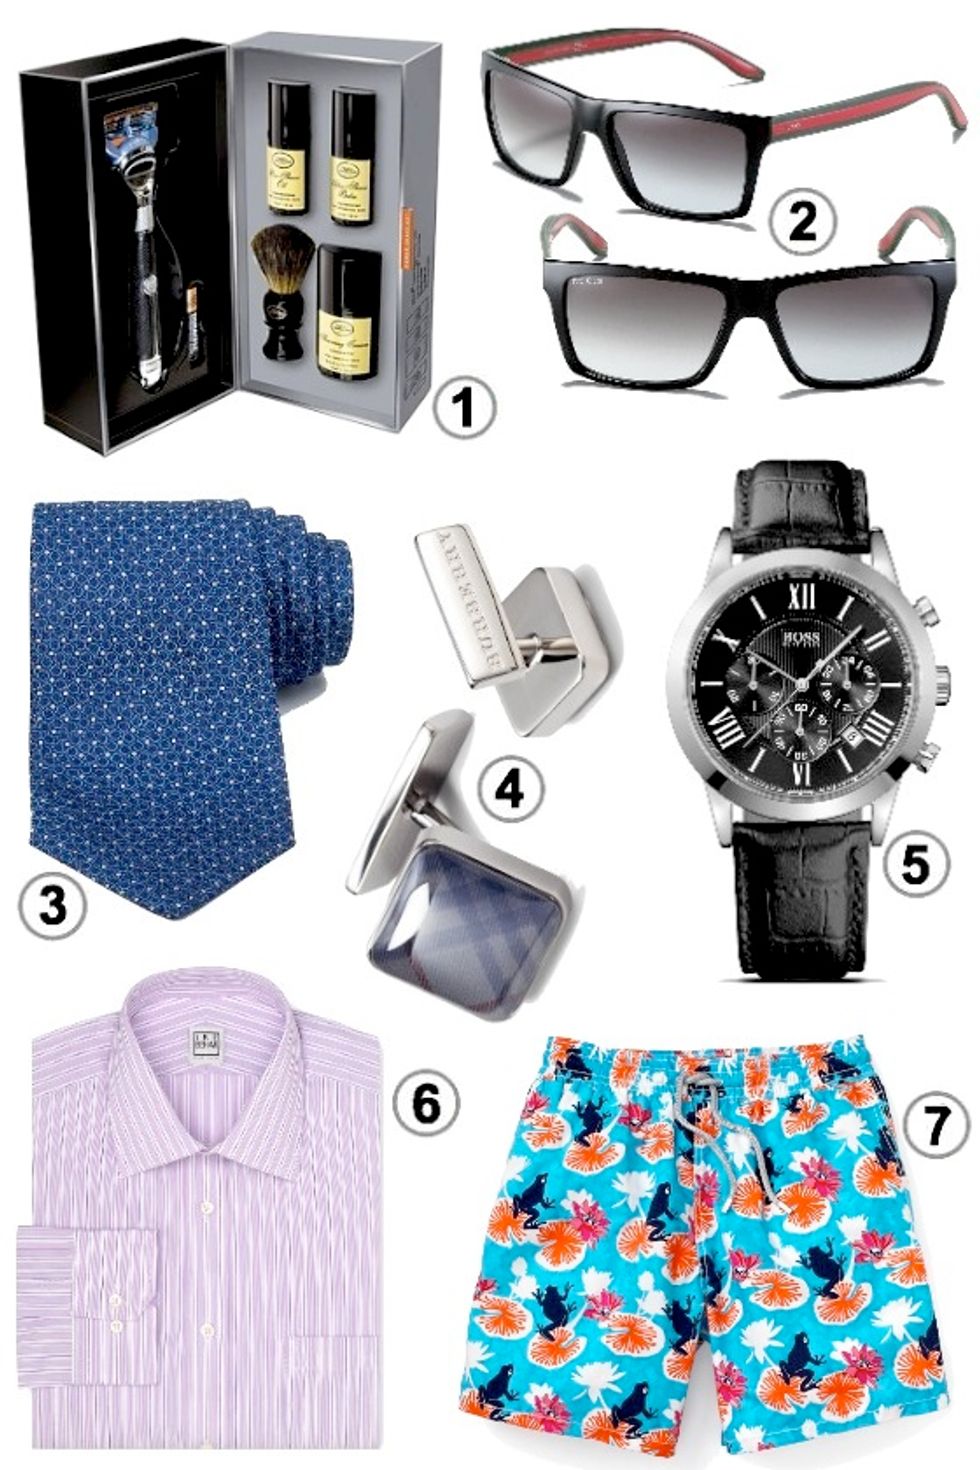 Look of the Week: Seven Great Men’s Finds at Bloomingdale’s